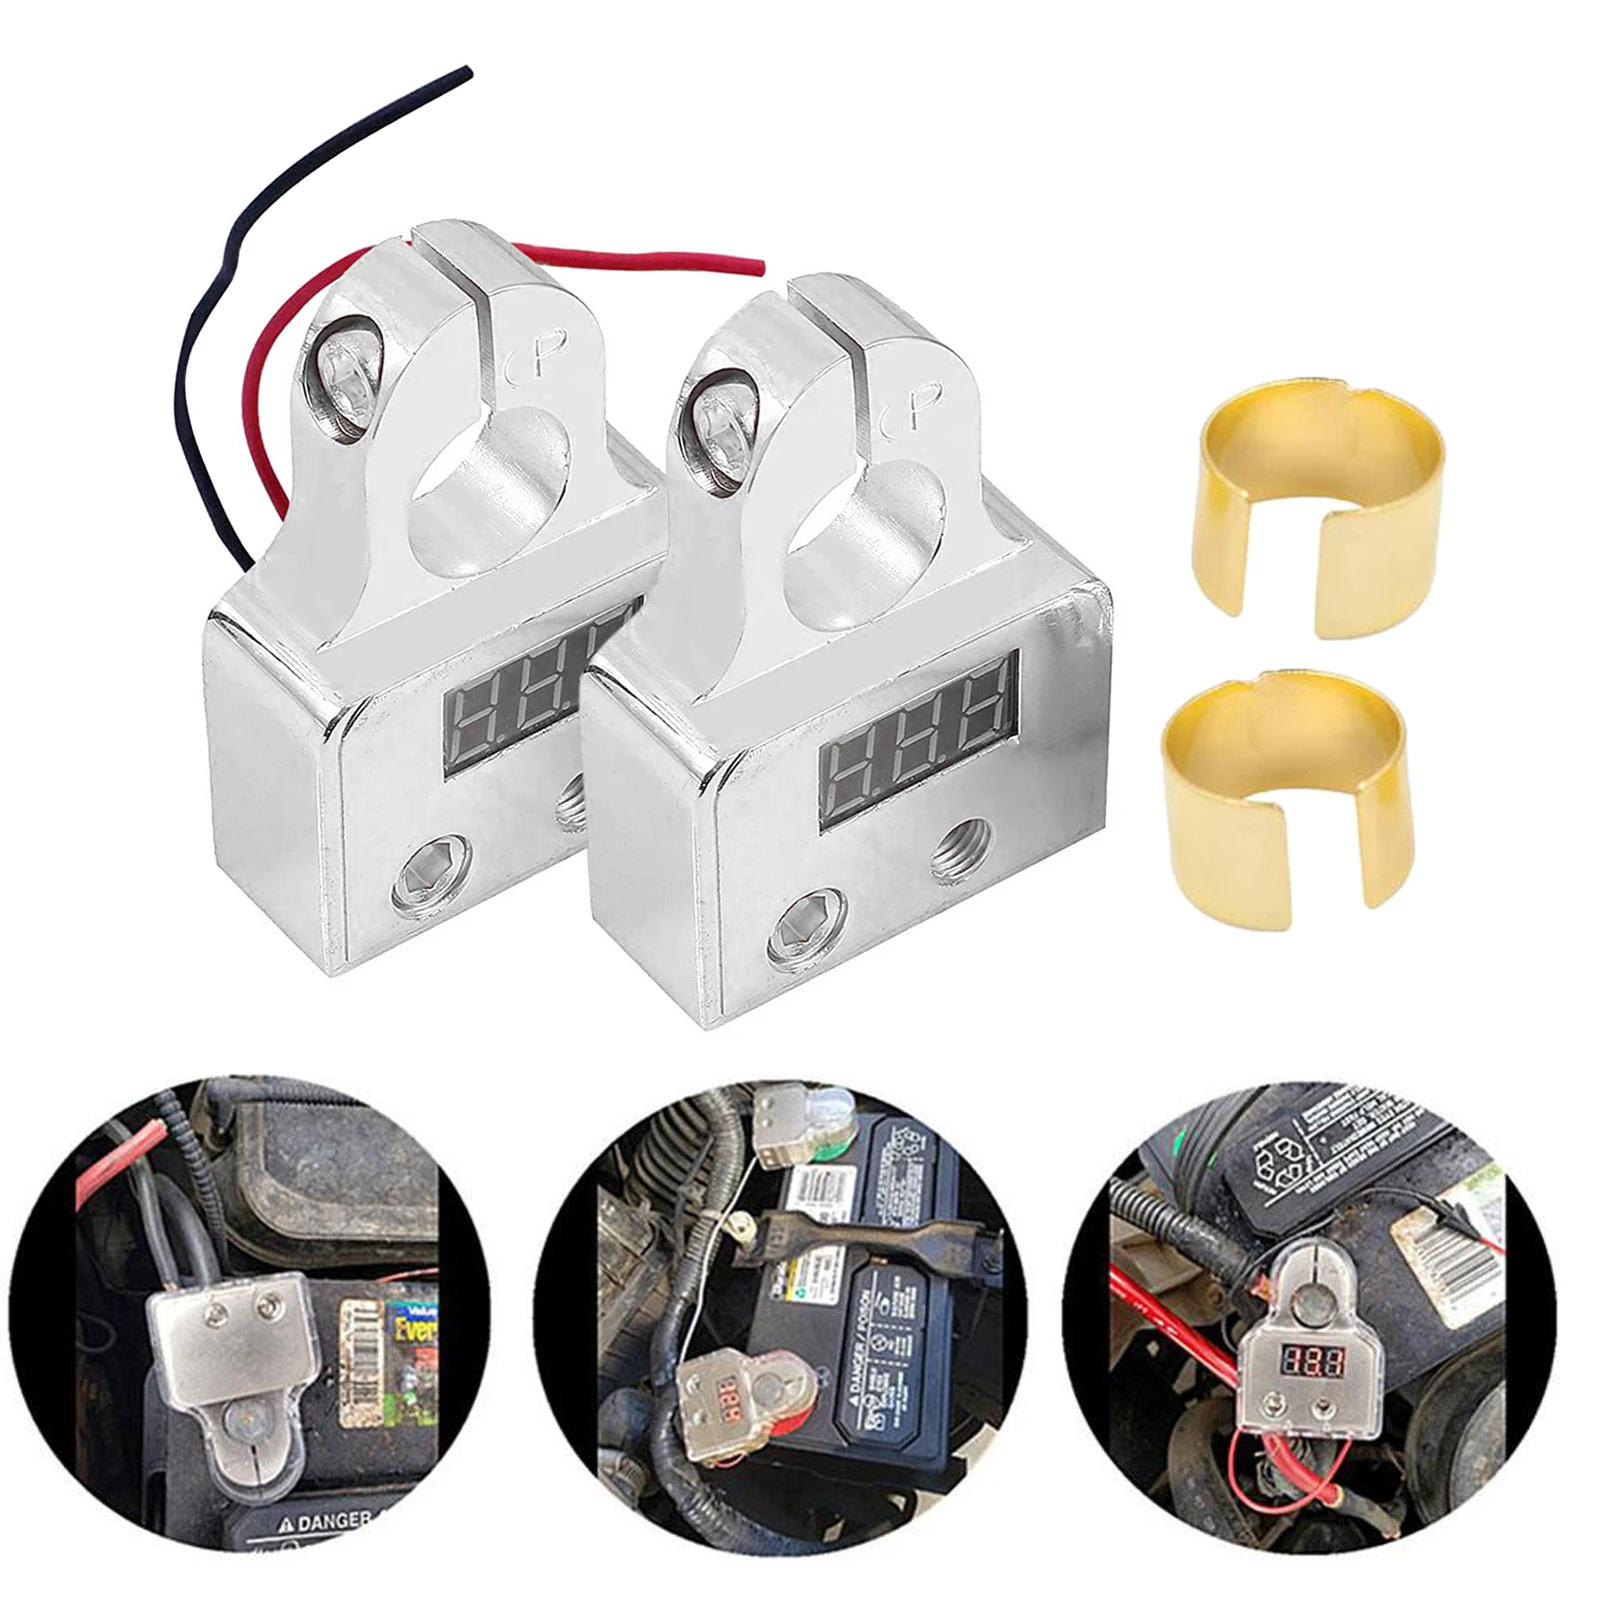 0/4/8 or   Battery Terminals with Shims with Voltmeter 2/4/8/ AWG for Car Marine Boat Motorcycle RV Vehicles